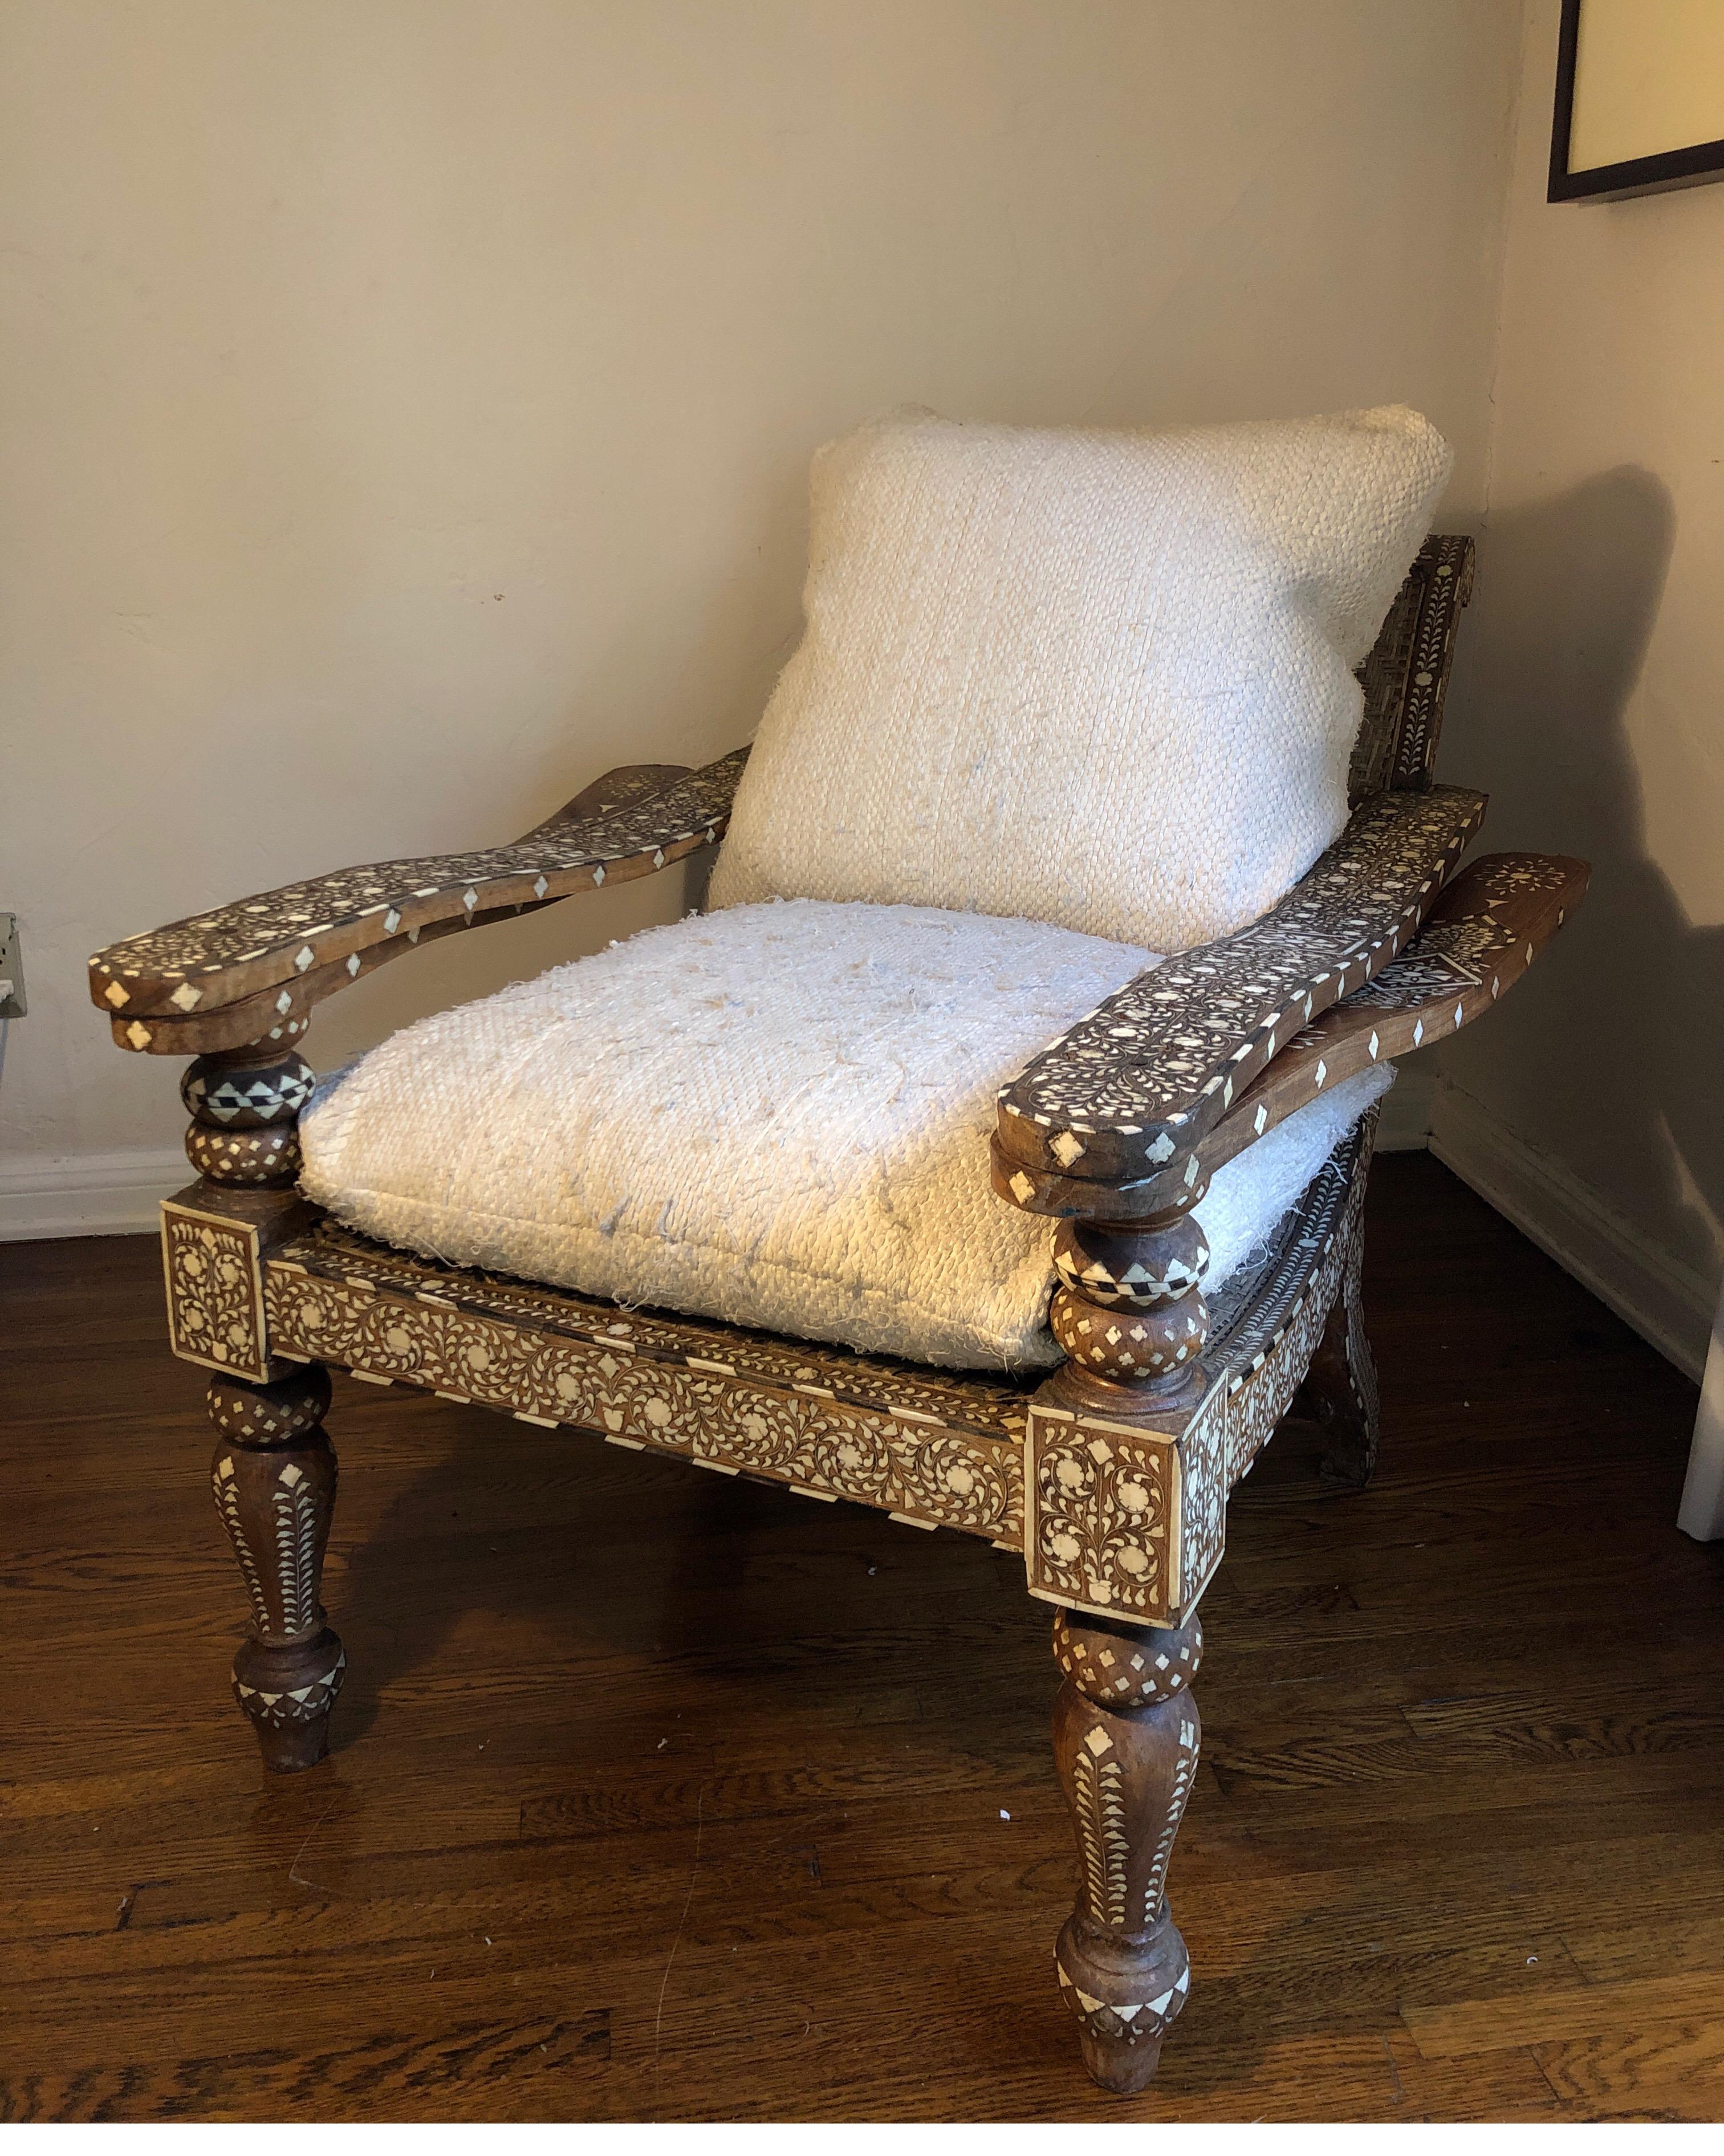 Antique Anglo-Indian chair with rare all-over bone and ebony inlay. 
Two swing out armrests to make it a lounger to raise your legs.

Can seating is in fair condition, but see pics as it has areas that could use repair. Believed to be Rosewood,